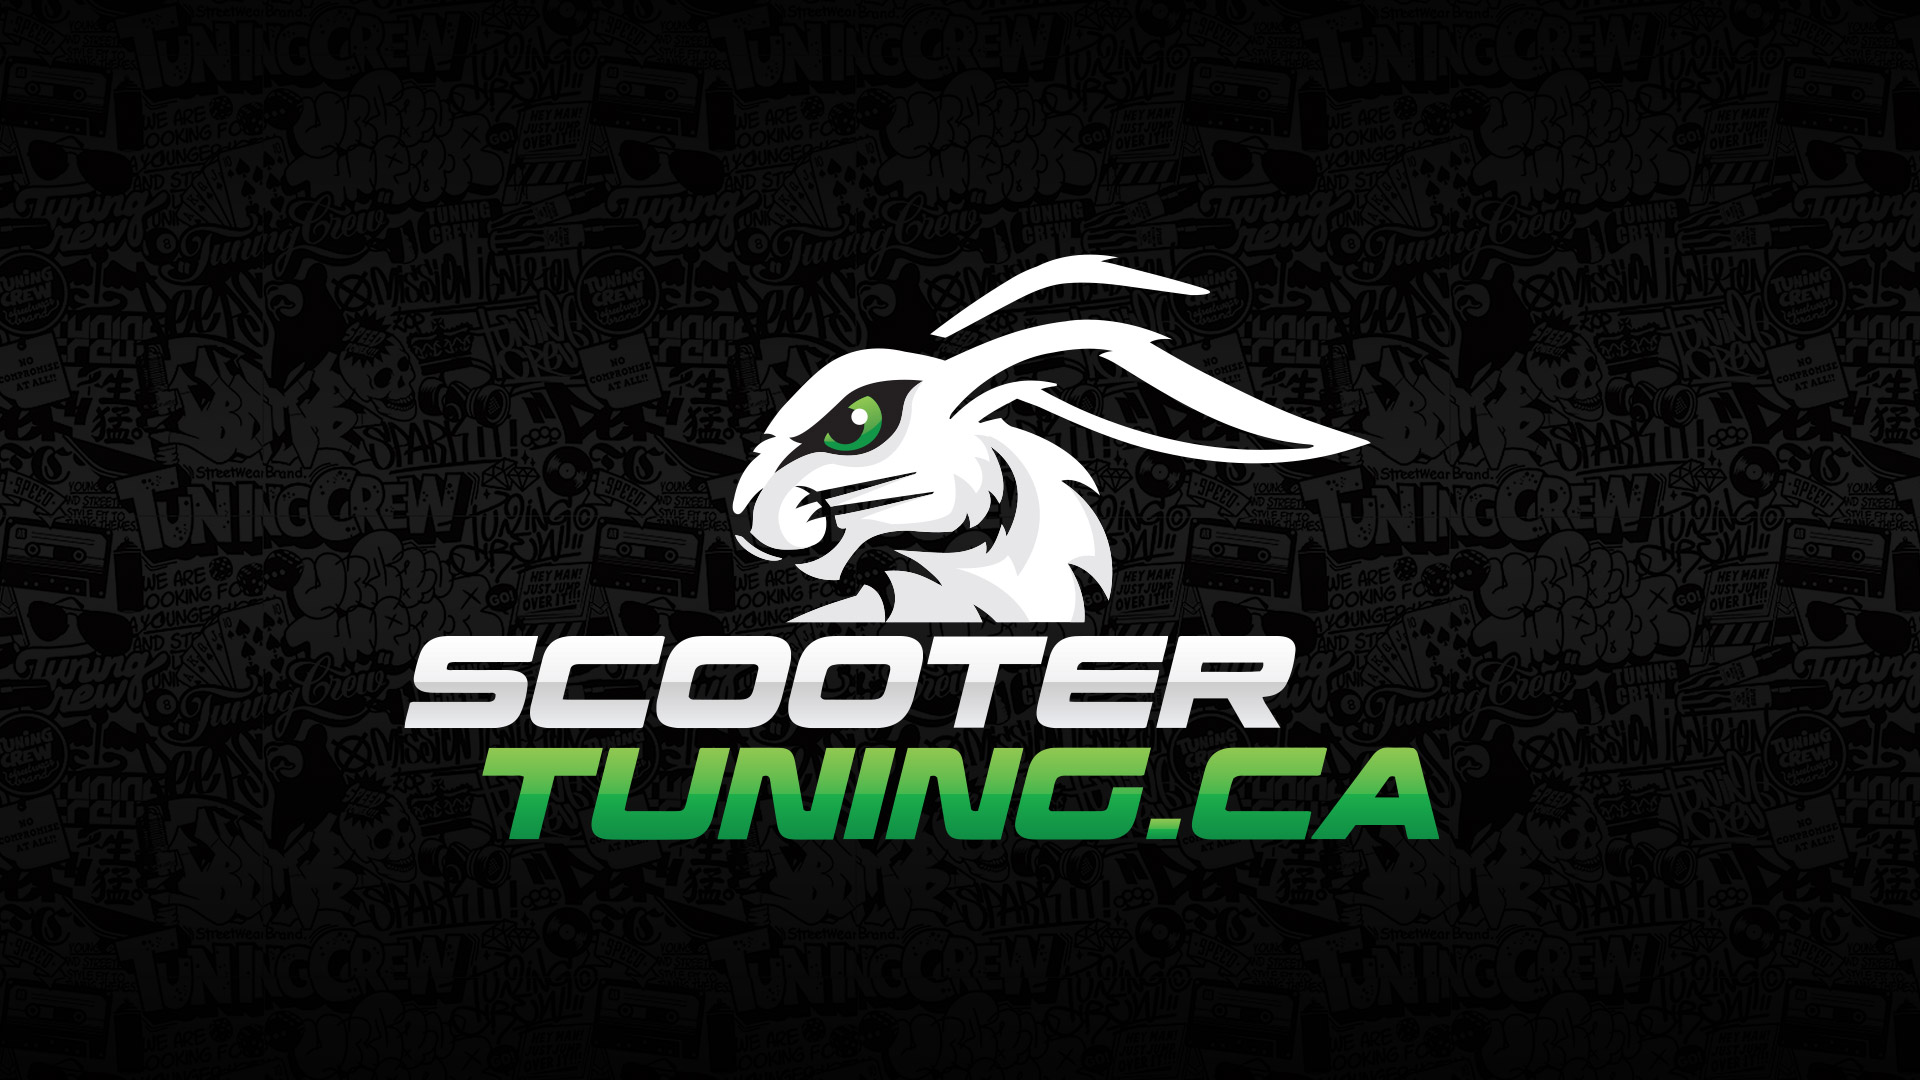 Wallpapers - Scootertuning